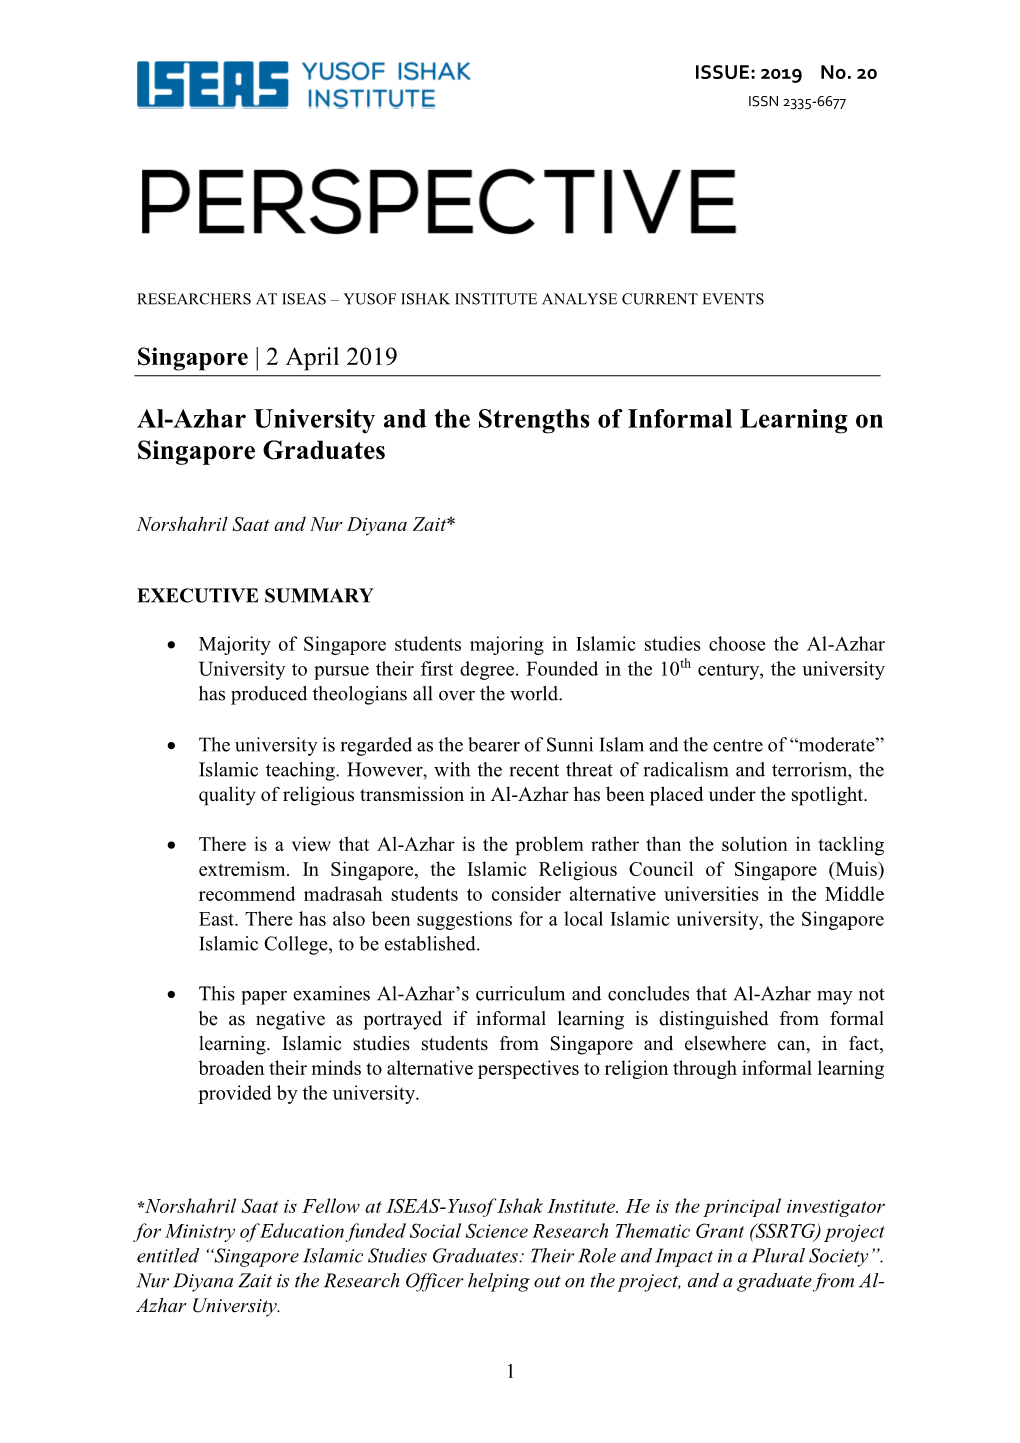 Al-Azhar University and the Strengths of Informal Learning on Singapore Graduates